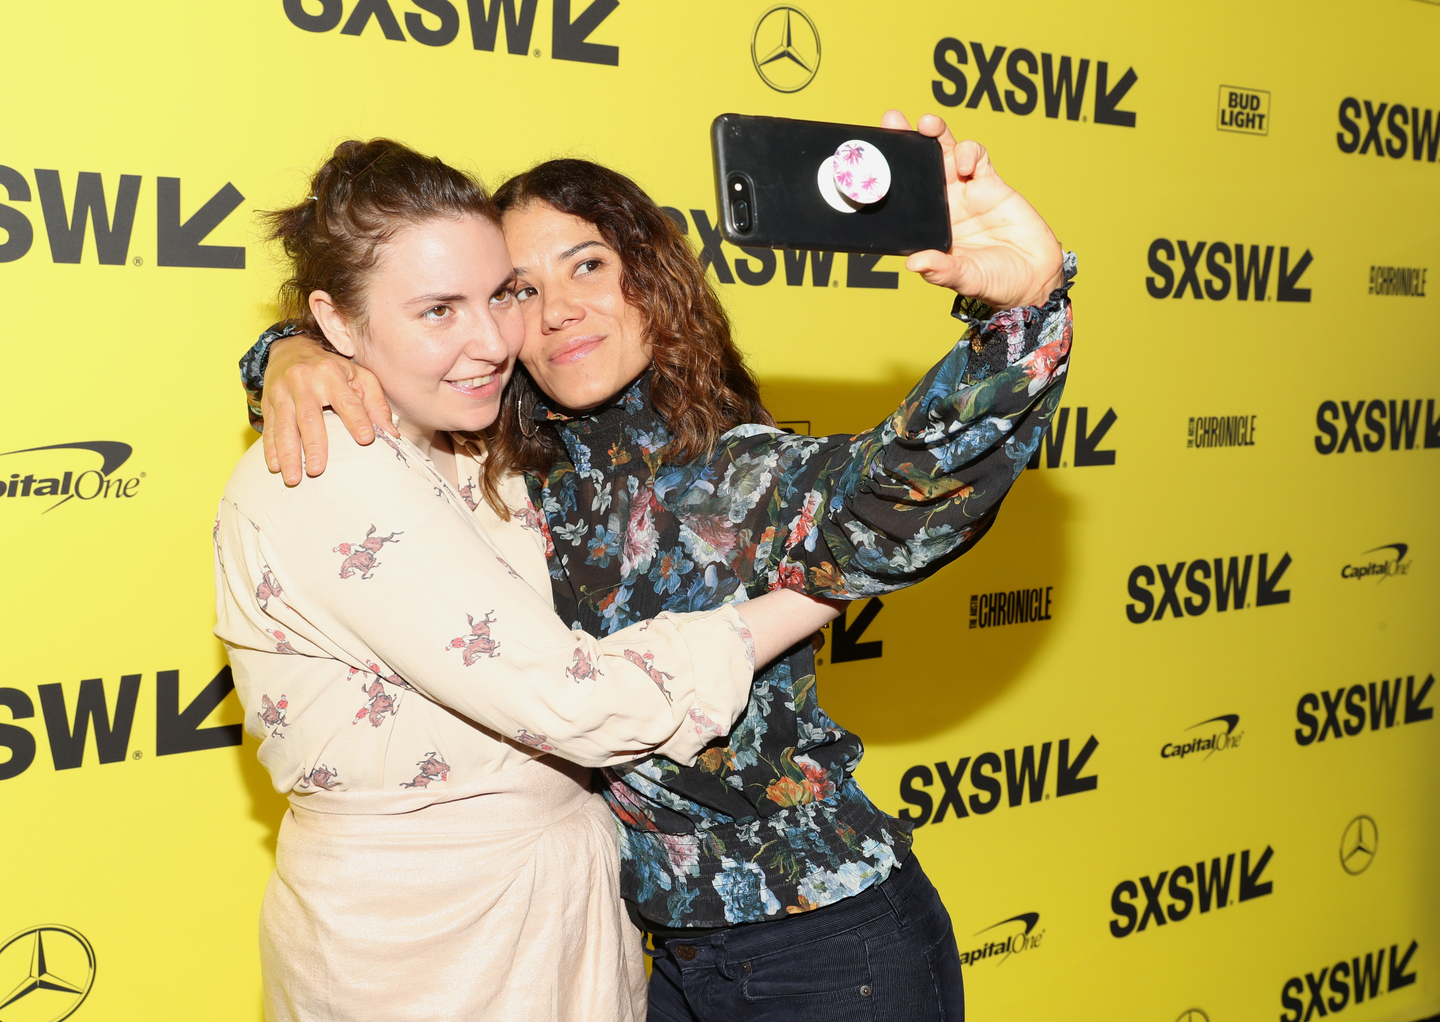 Lena Dunham and Soraya Selene at the Half the Picture Red Carpet. Photo by Hutton Supancic/Getty Images for SXSW